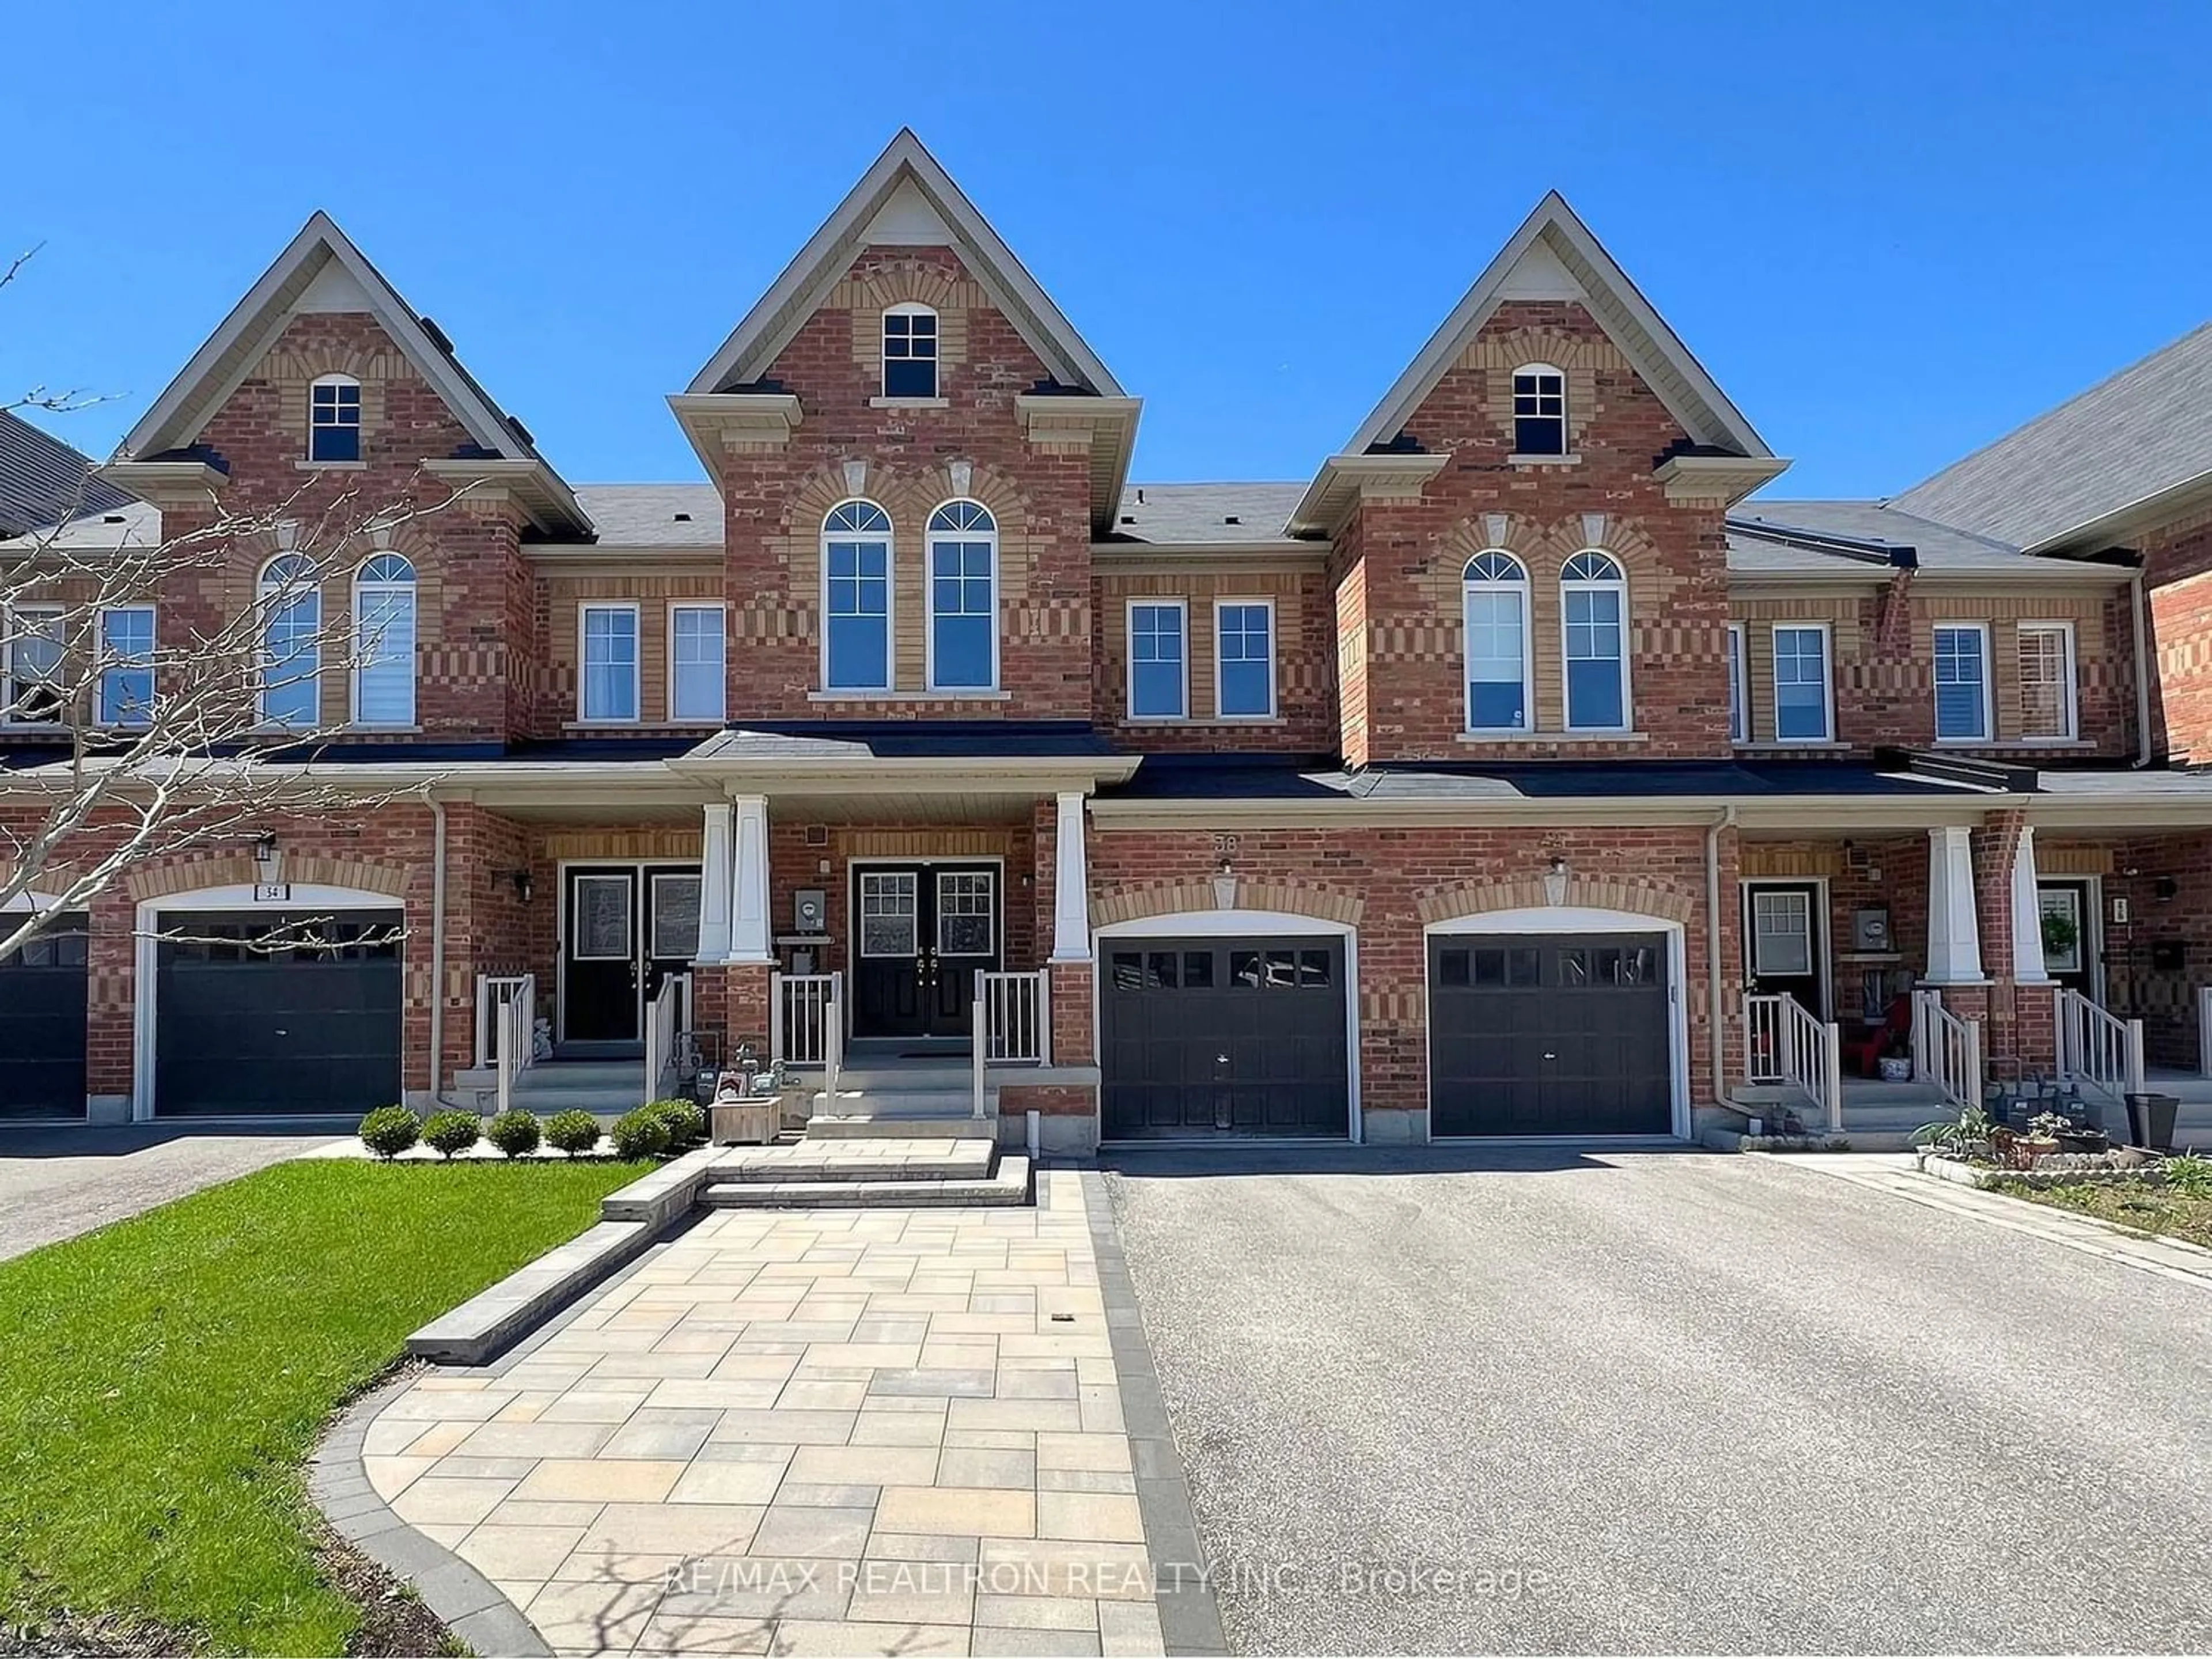 Home with brick exterior material for 38 Flute St, Whitchurch-Stouffville Ontario L4A 4N9